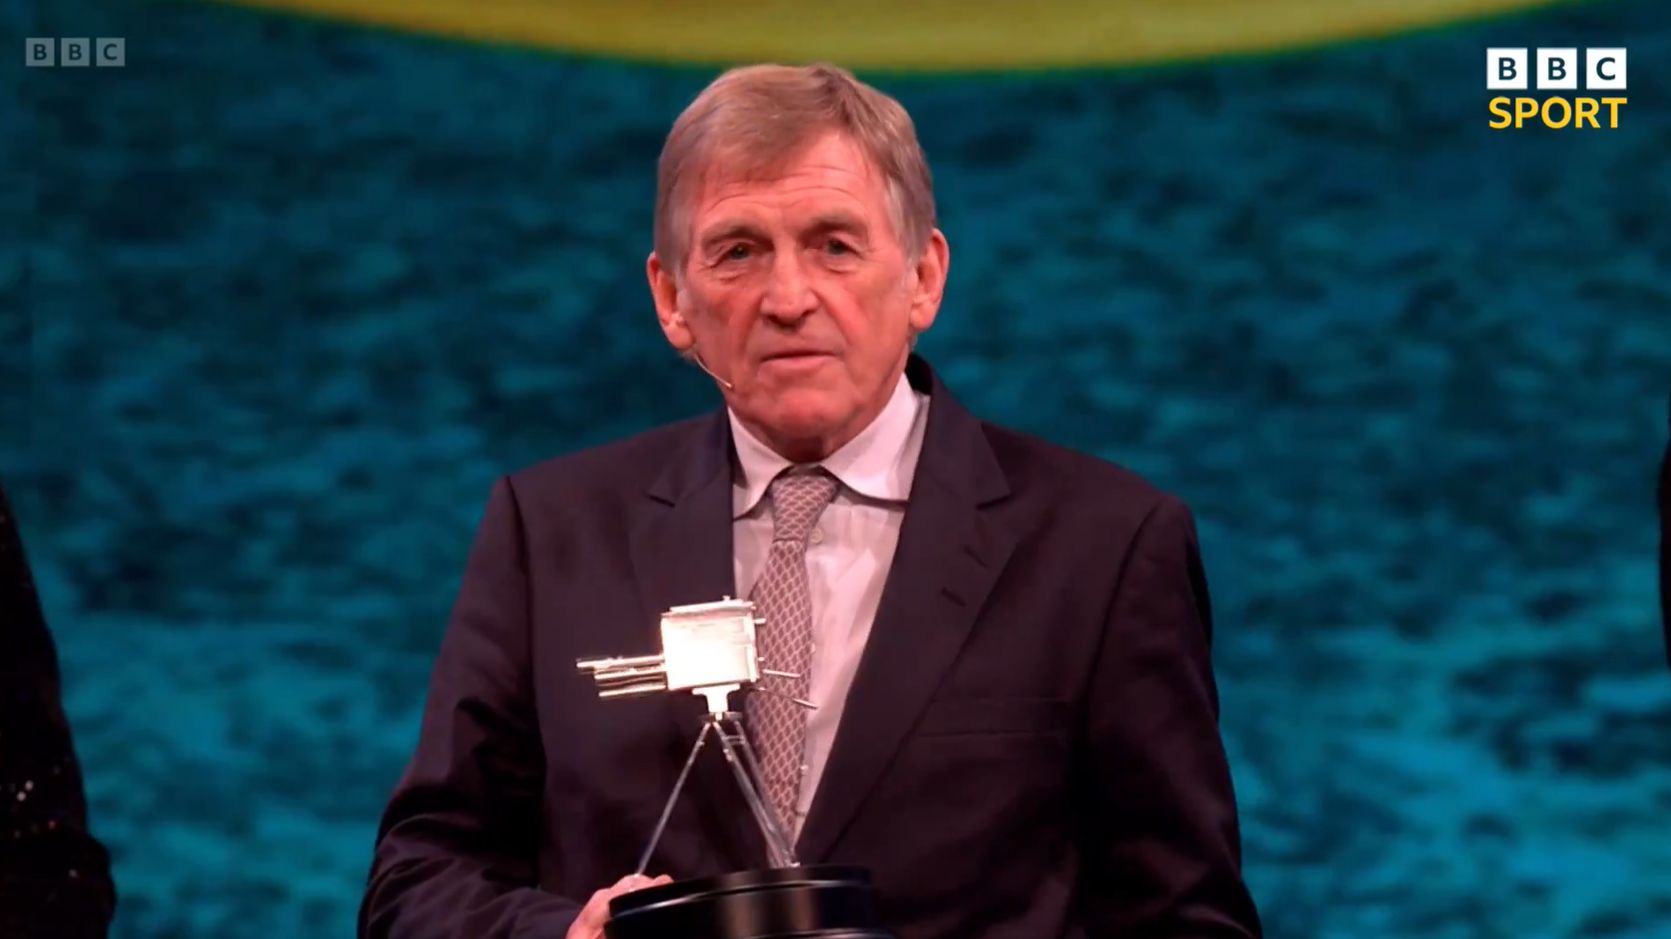 Sir Kenny Dalglish receives the Lifetime Achievement Award at the 2023 BBC Sports Personality of the Year ceremony